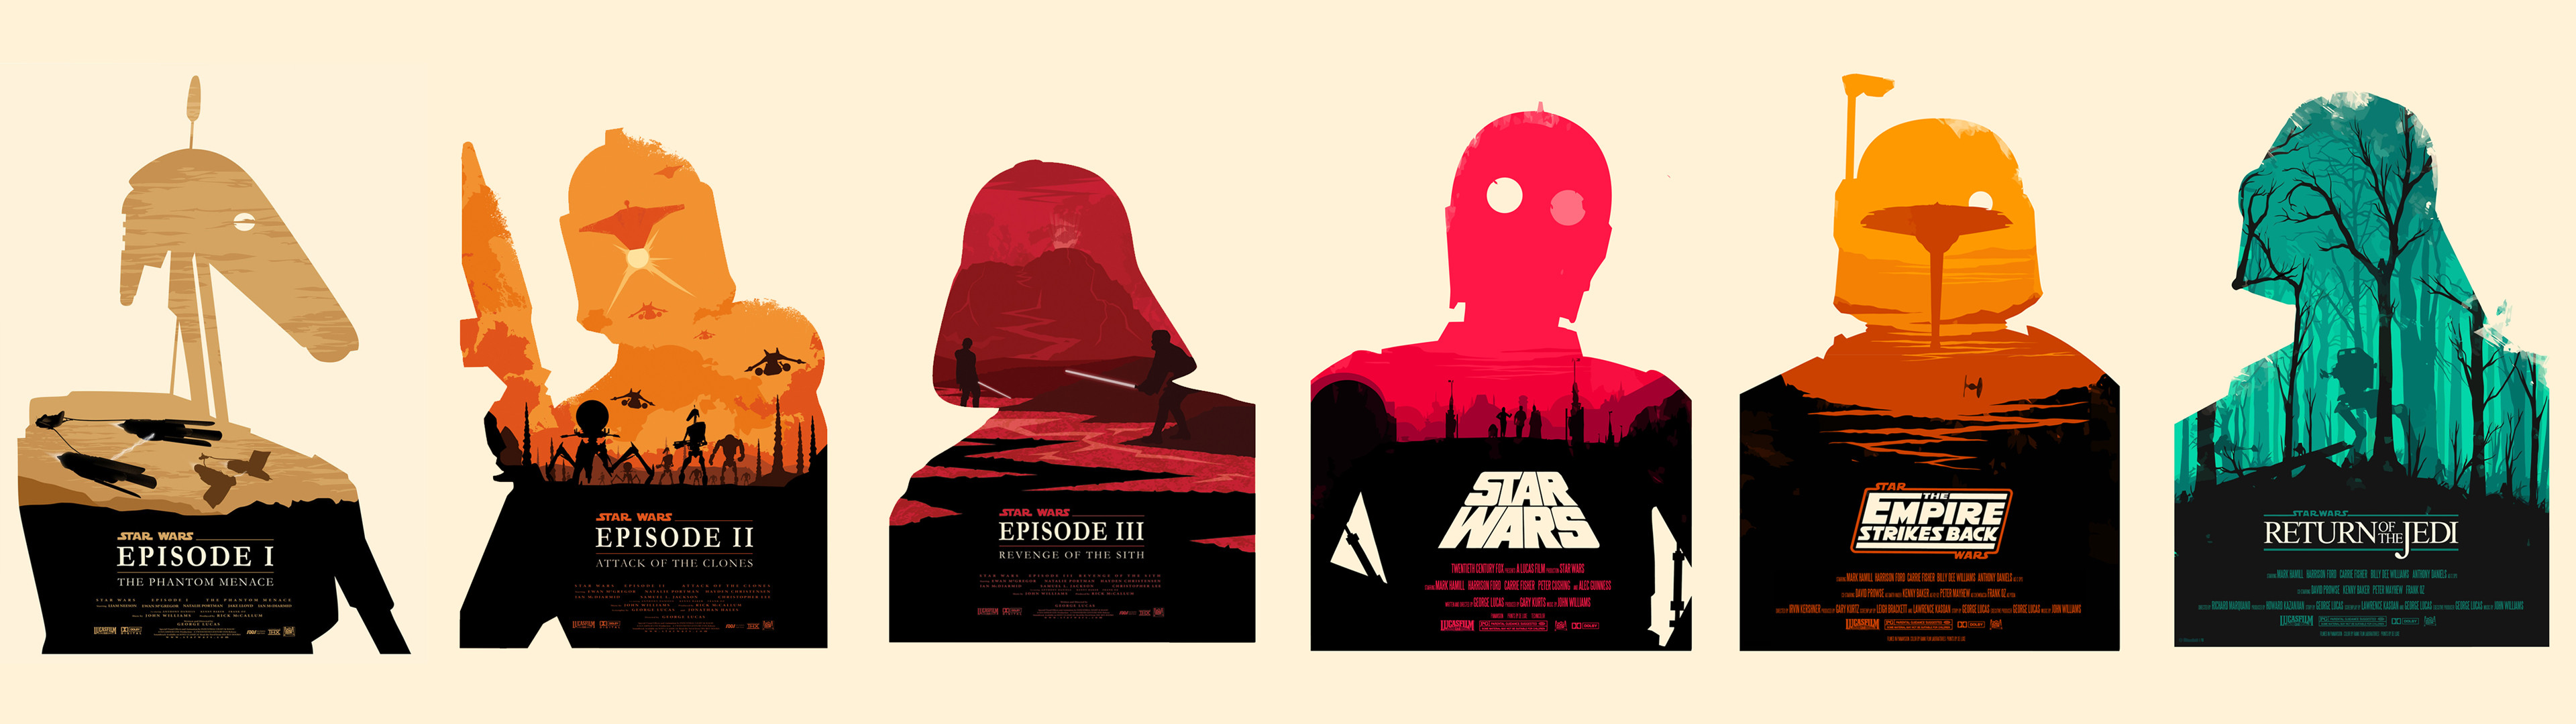 Dual-monitor-Star-Wars-posters-3840×1080-by-Douglas-